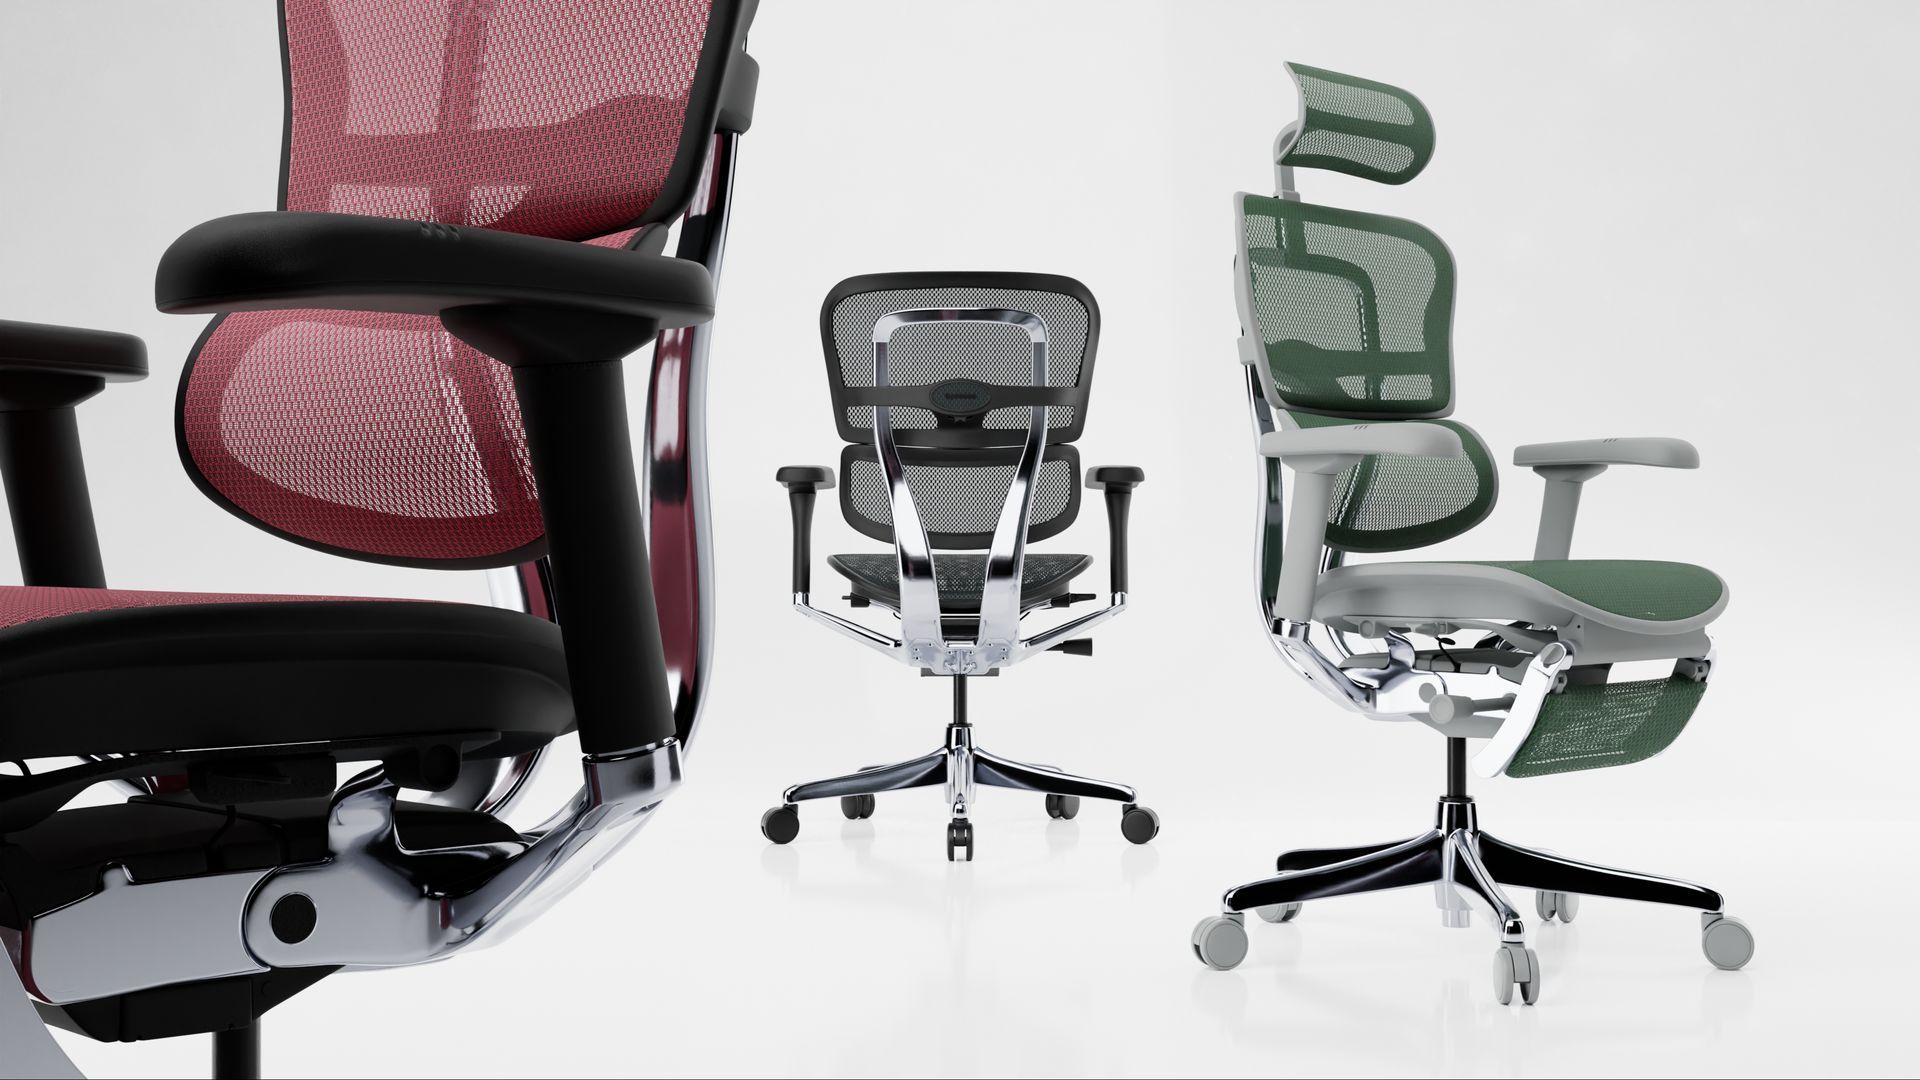 3 Ergohuman Elite office chairs in a white space. The left chair is black frame with scarlet mesh. The middle chair, facing the back, is black frame black mesh. The chair on the right is grey frame with green mesh. 